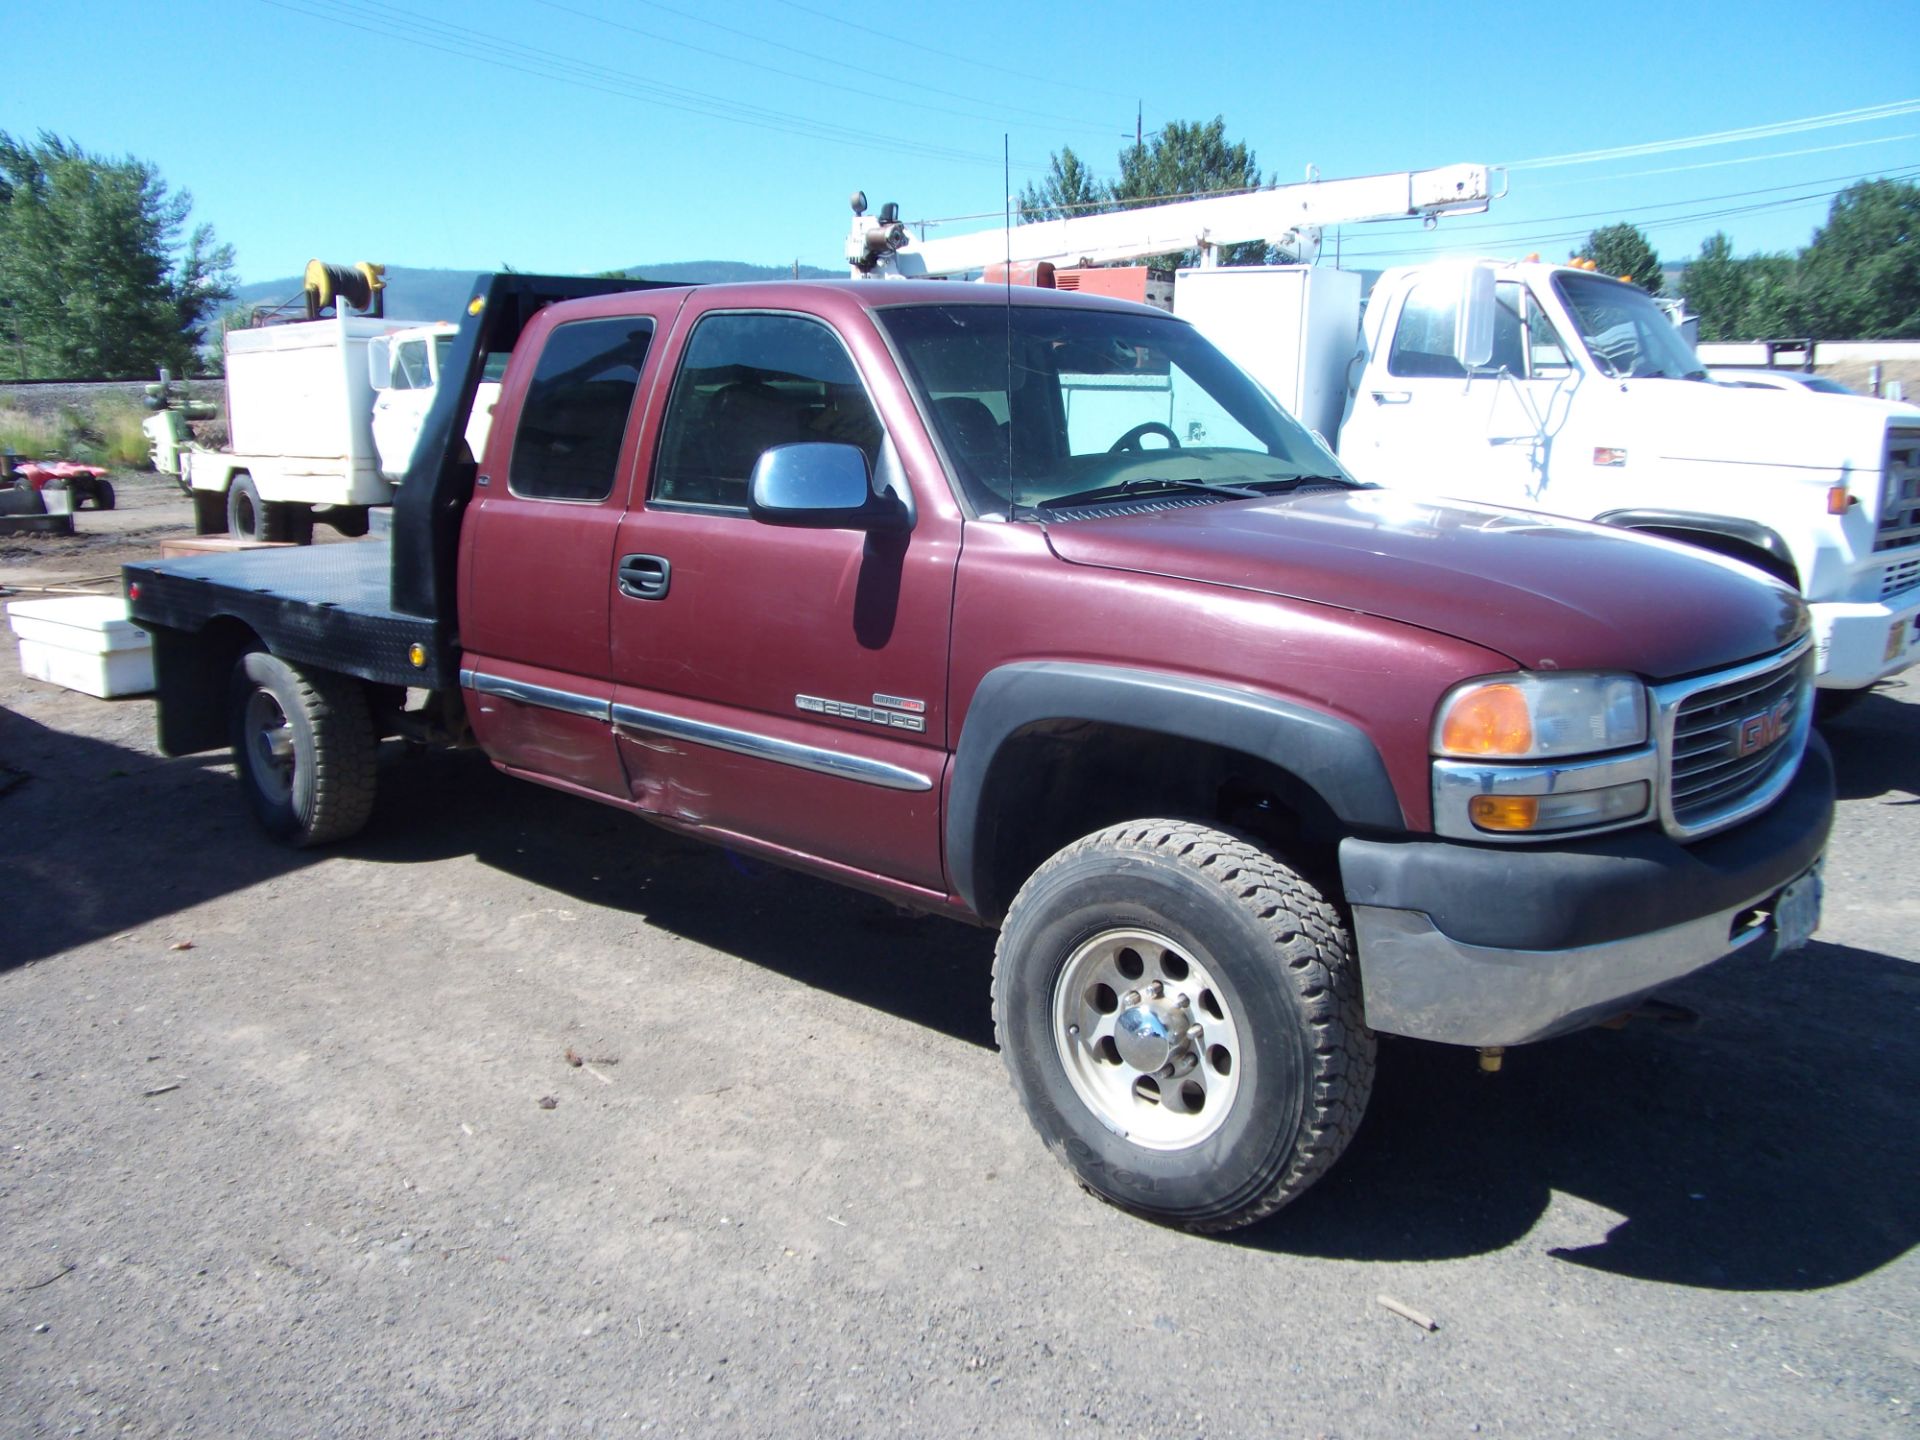 2001 GMC extended cab pickup 4x4 Duramax engine 5spd trans flatbed